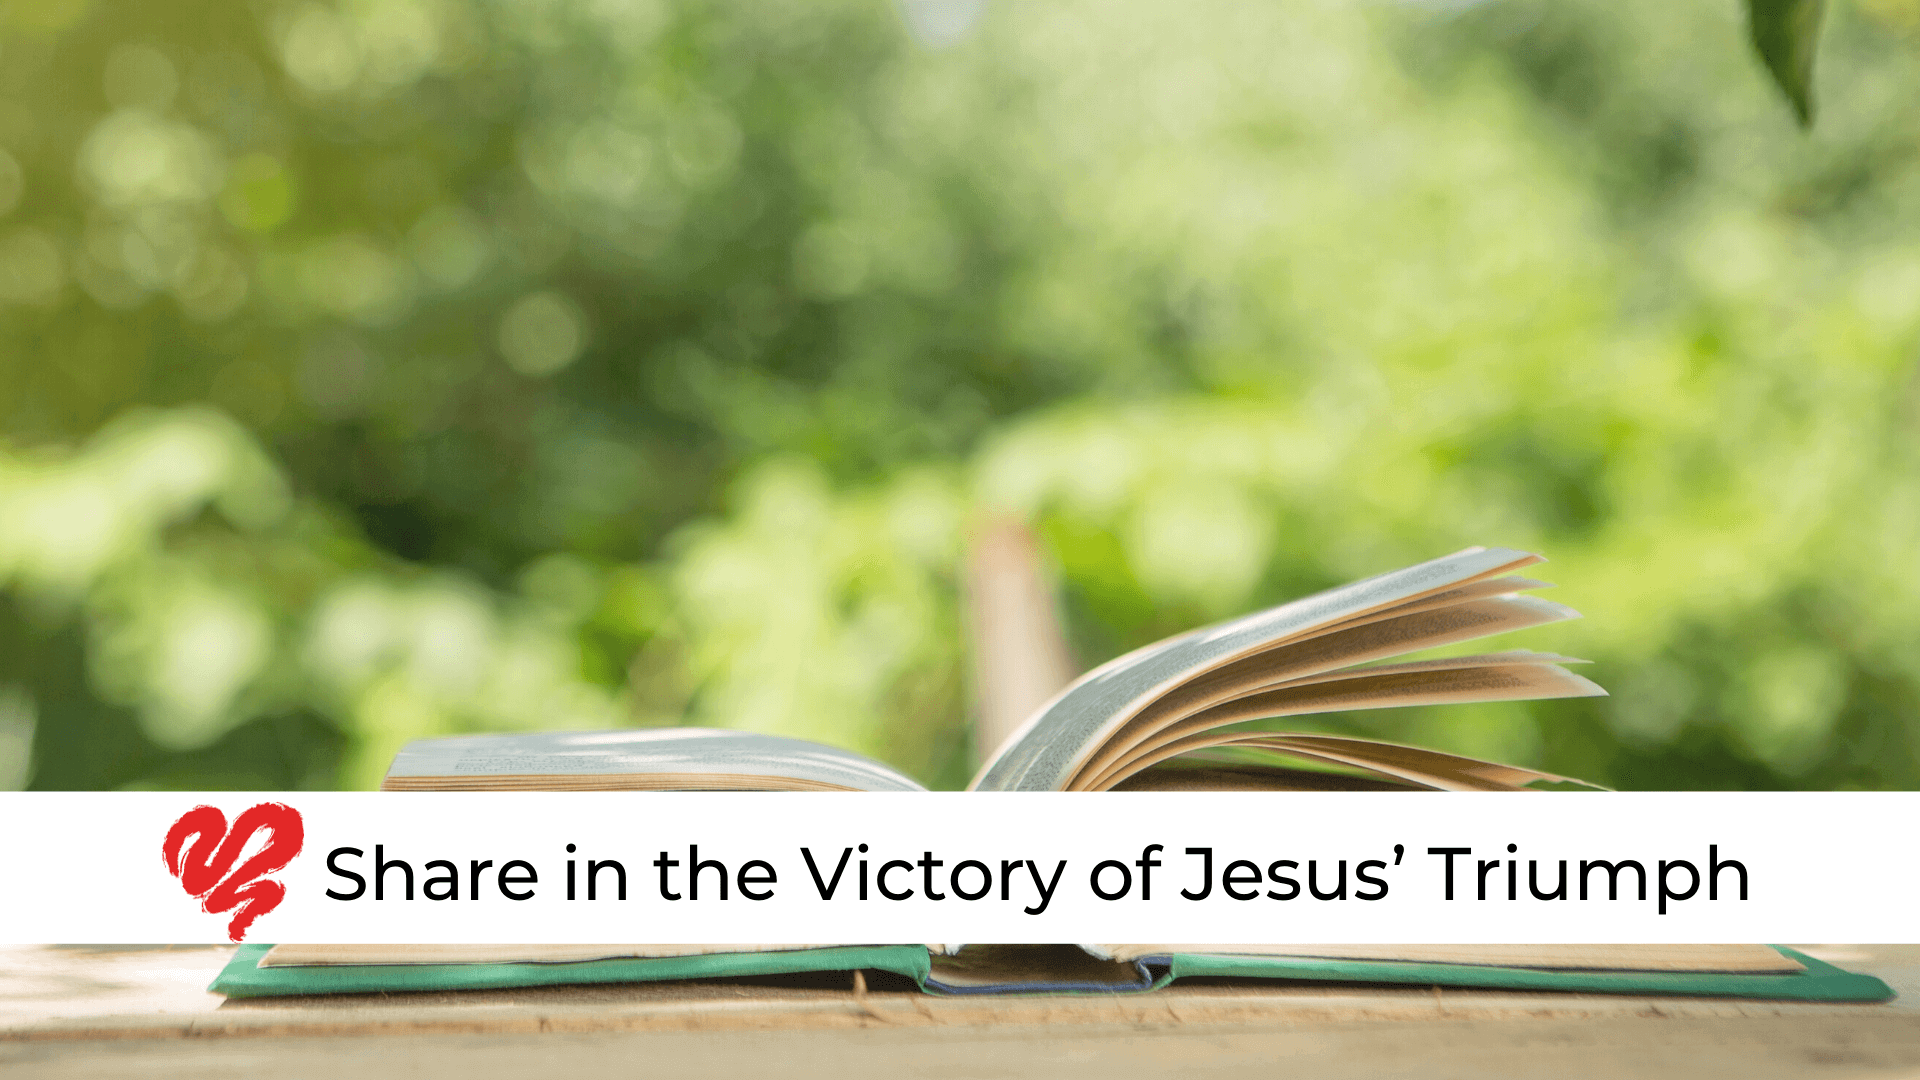 Share in the Victory of Jesus' Triumph